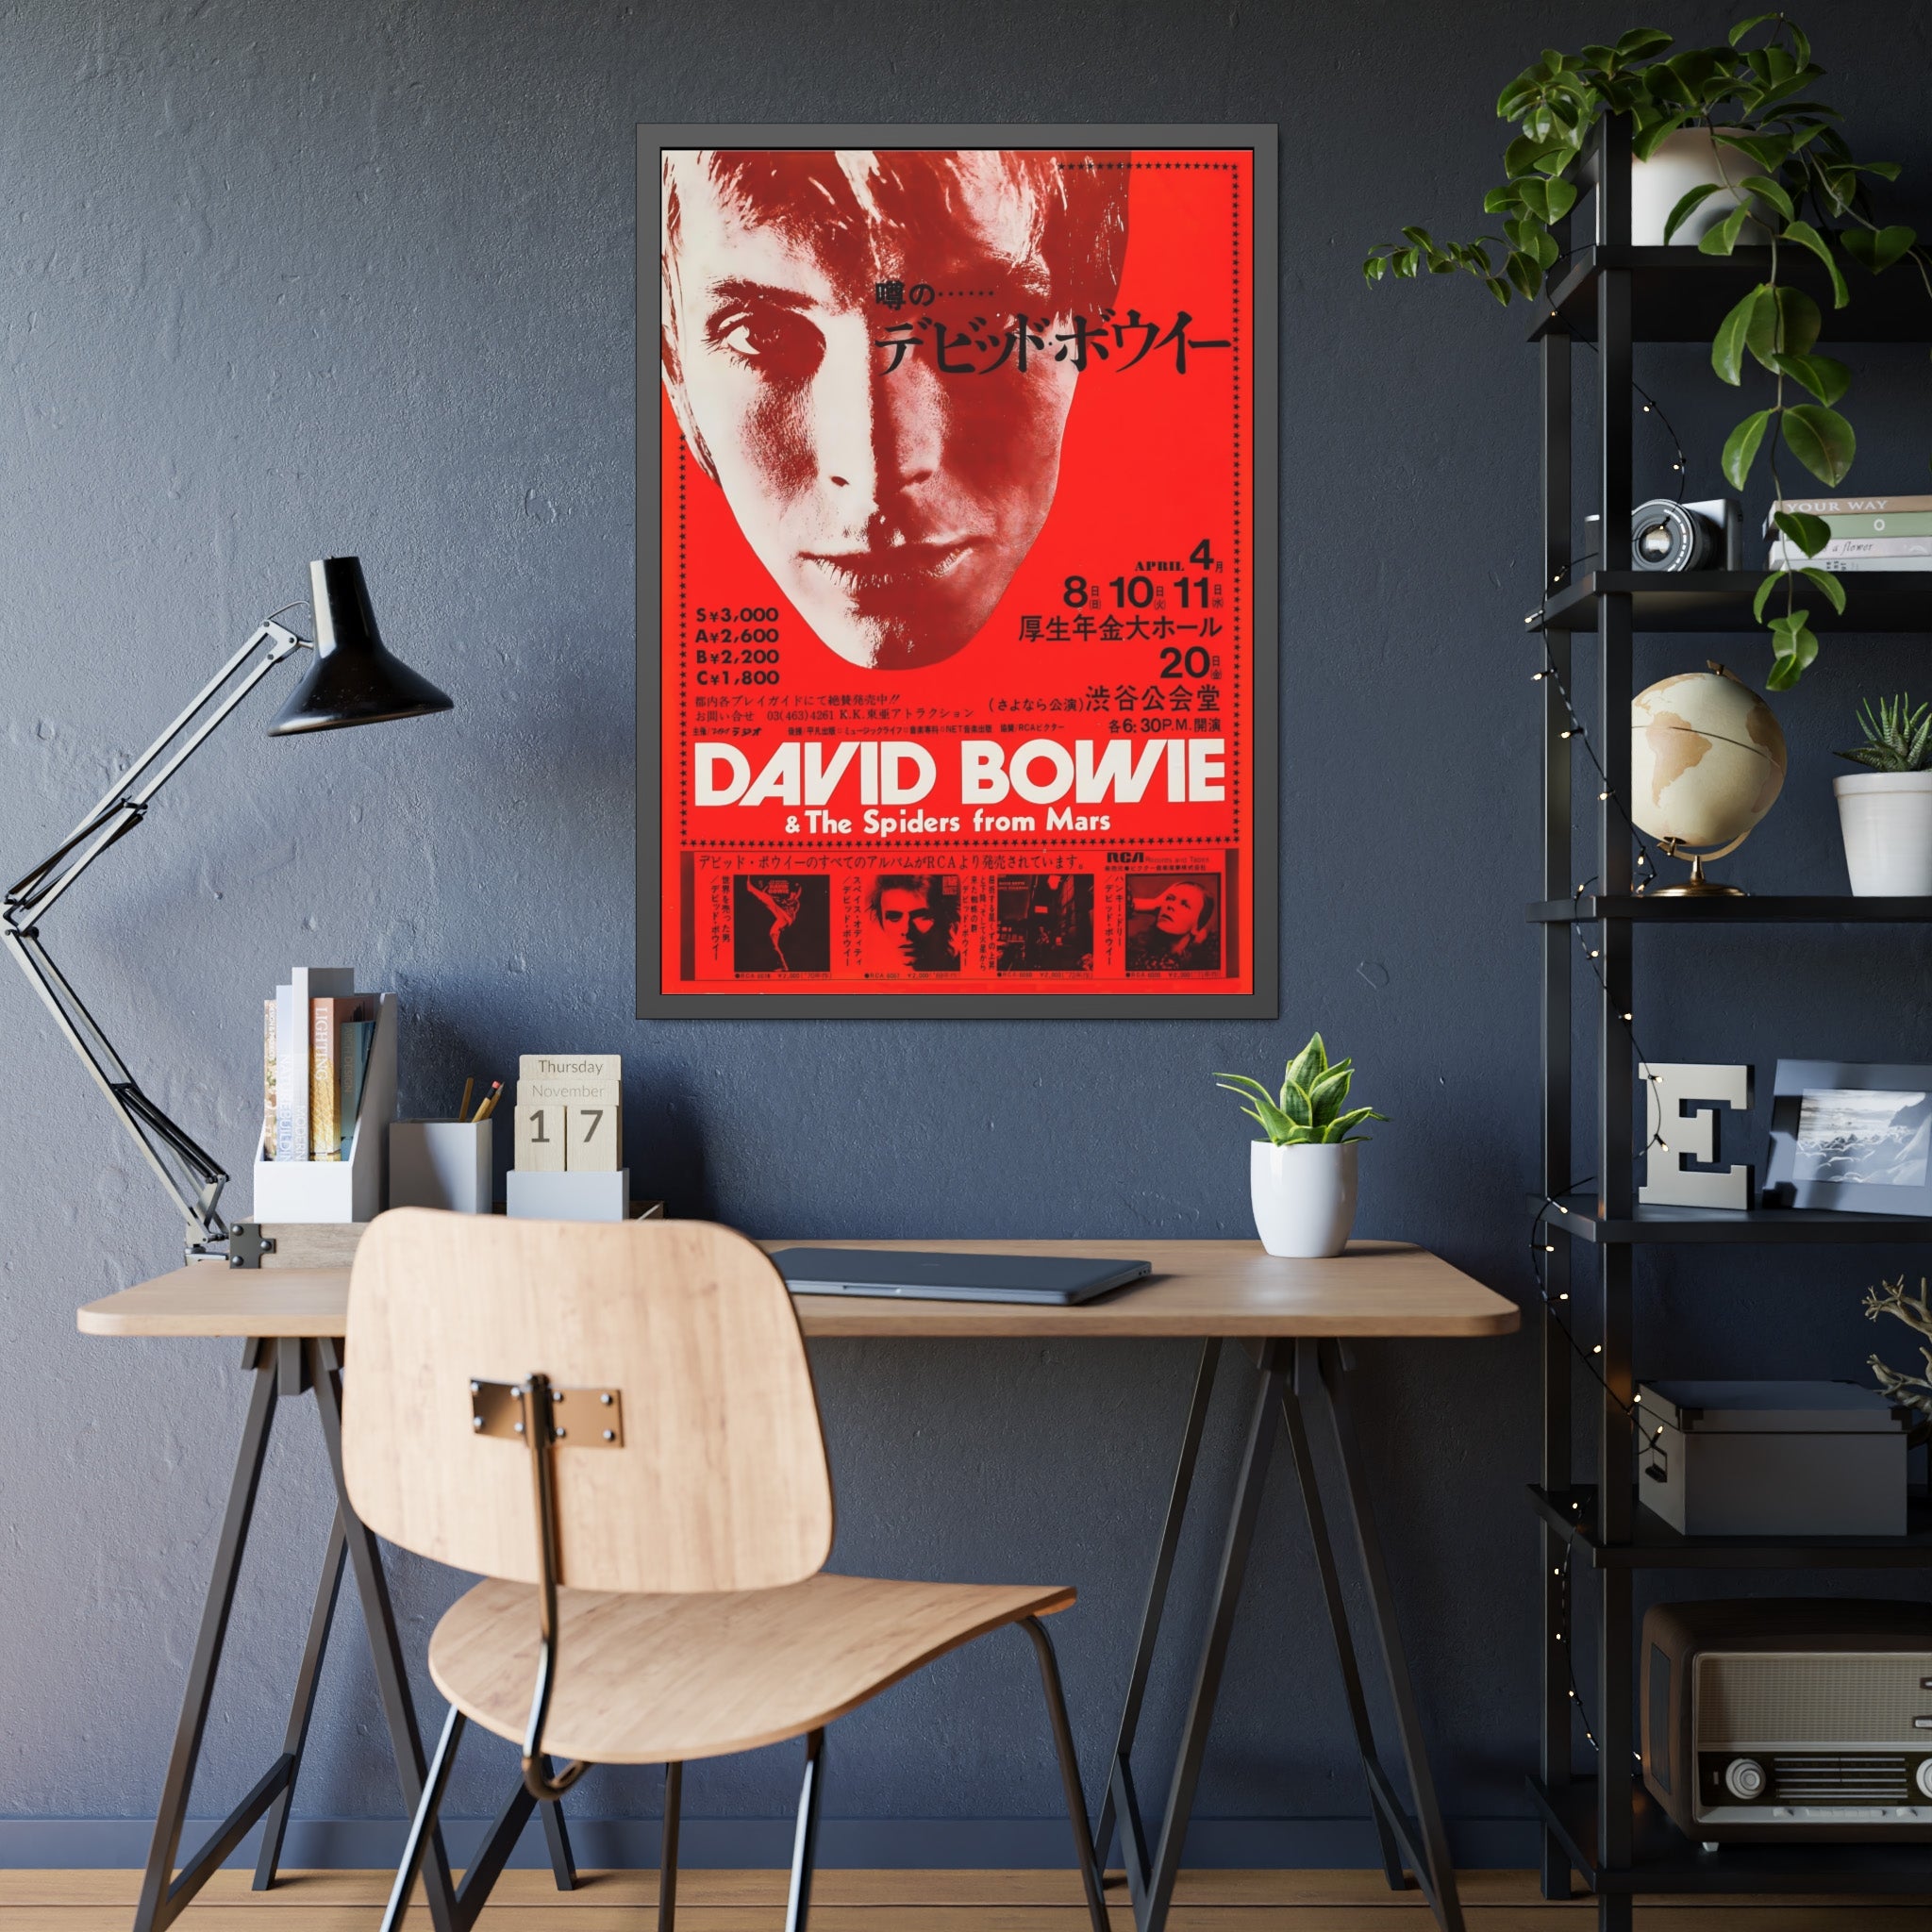 David Bowie & The Spiders From Mars Concert Poster